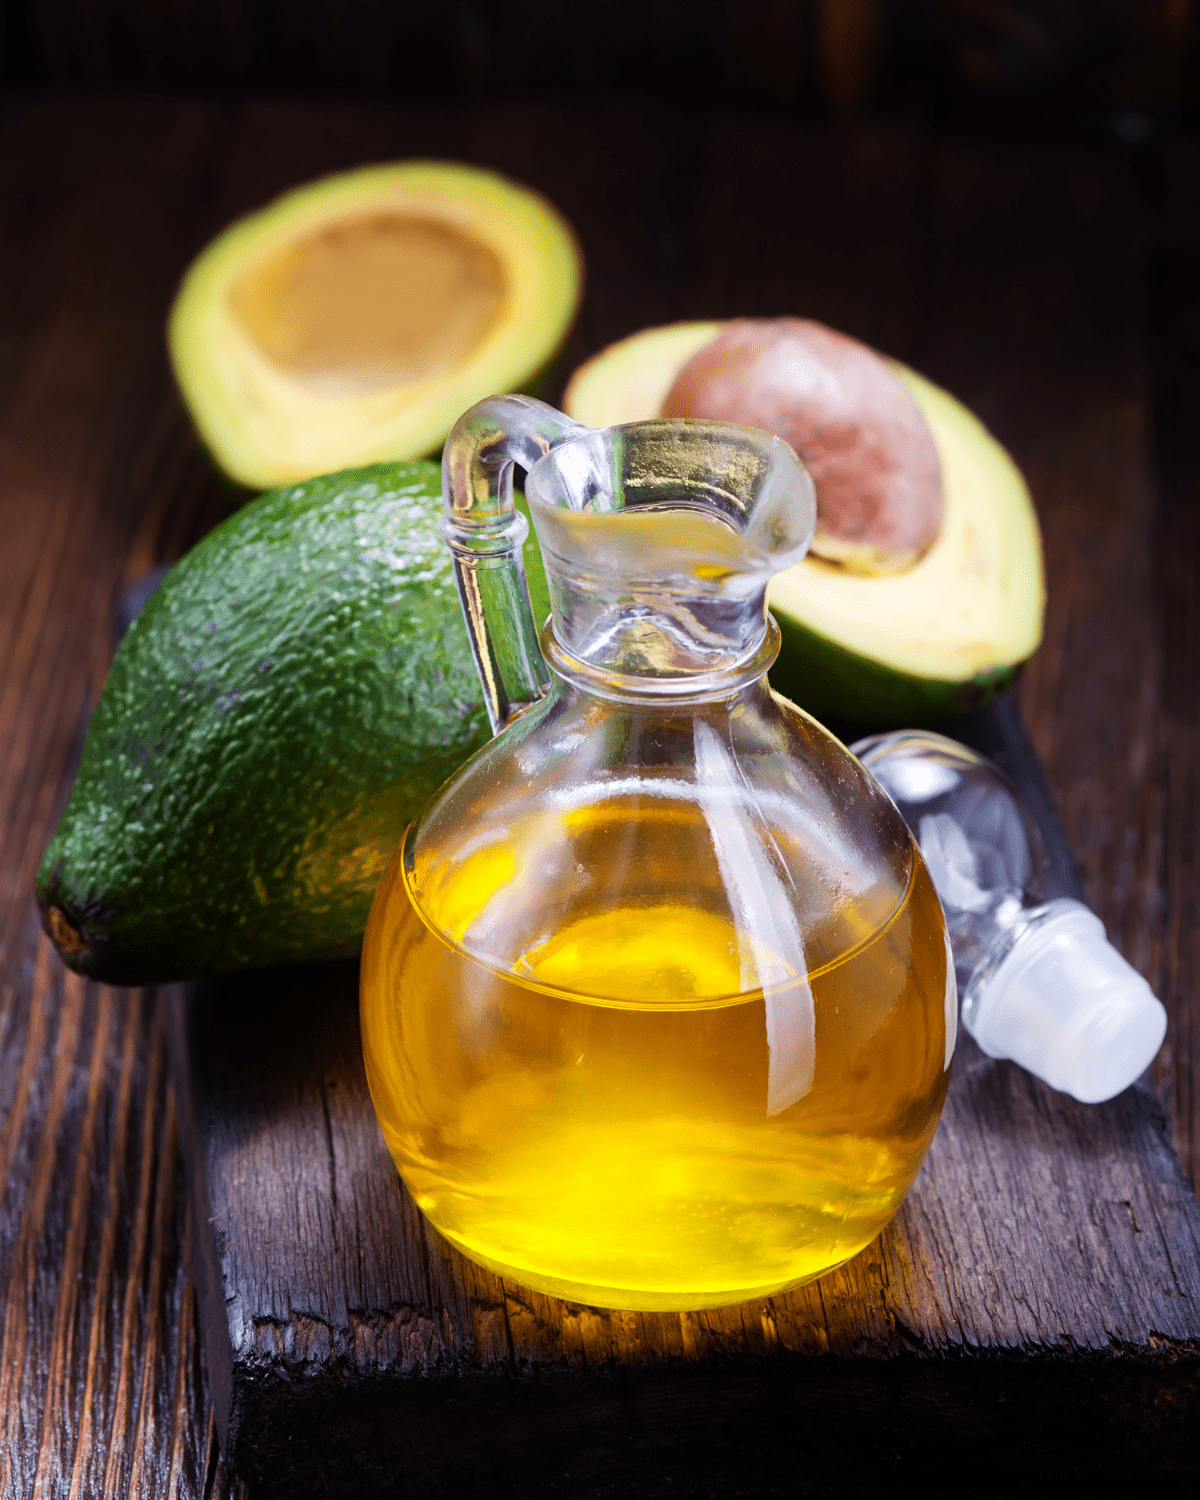 Small glass jar of avocado oil with 2 avocados in the background.